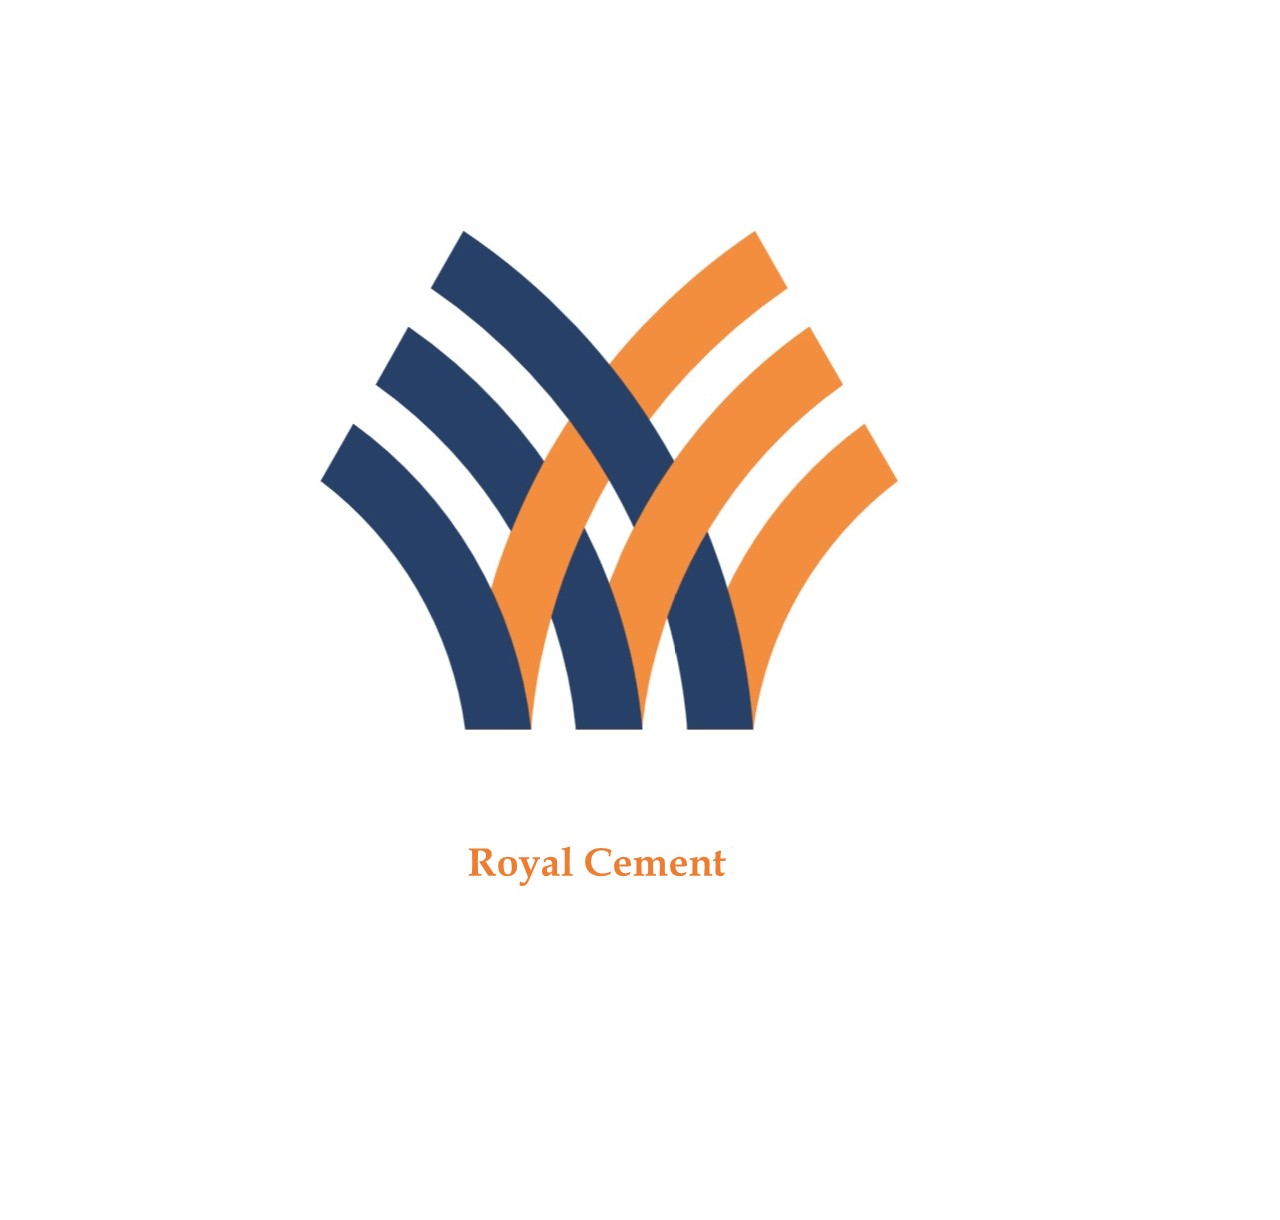 Royal Cement Group